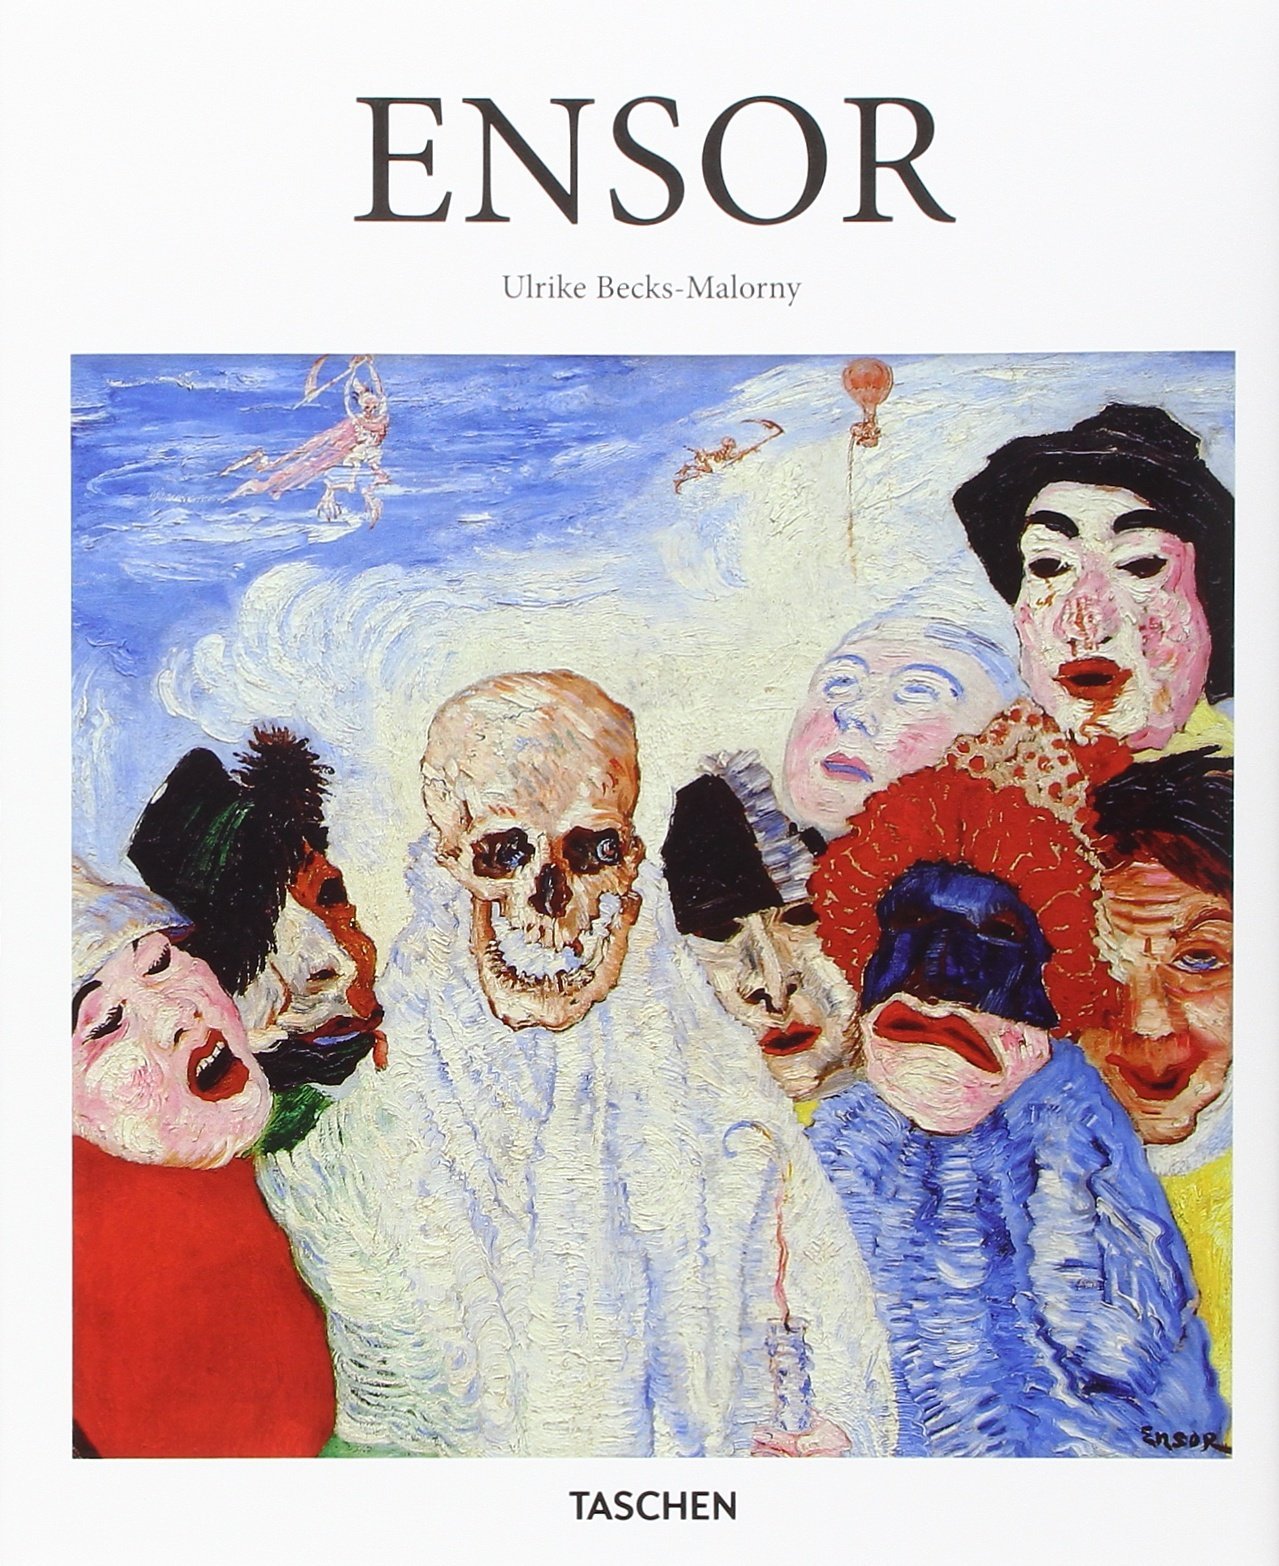 Book about the Belgian artist James Ensor, Creative artistic inspiration, www.Fenne.be